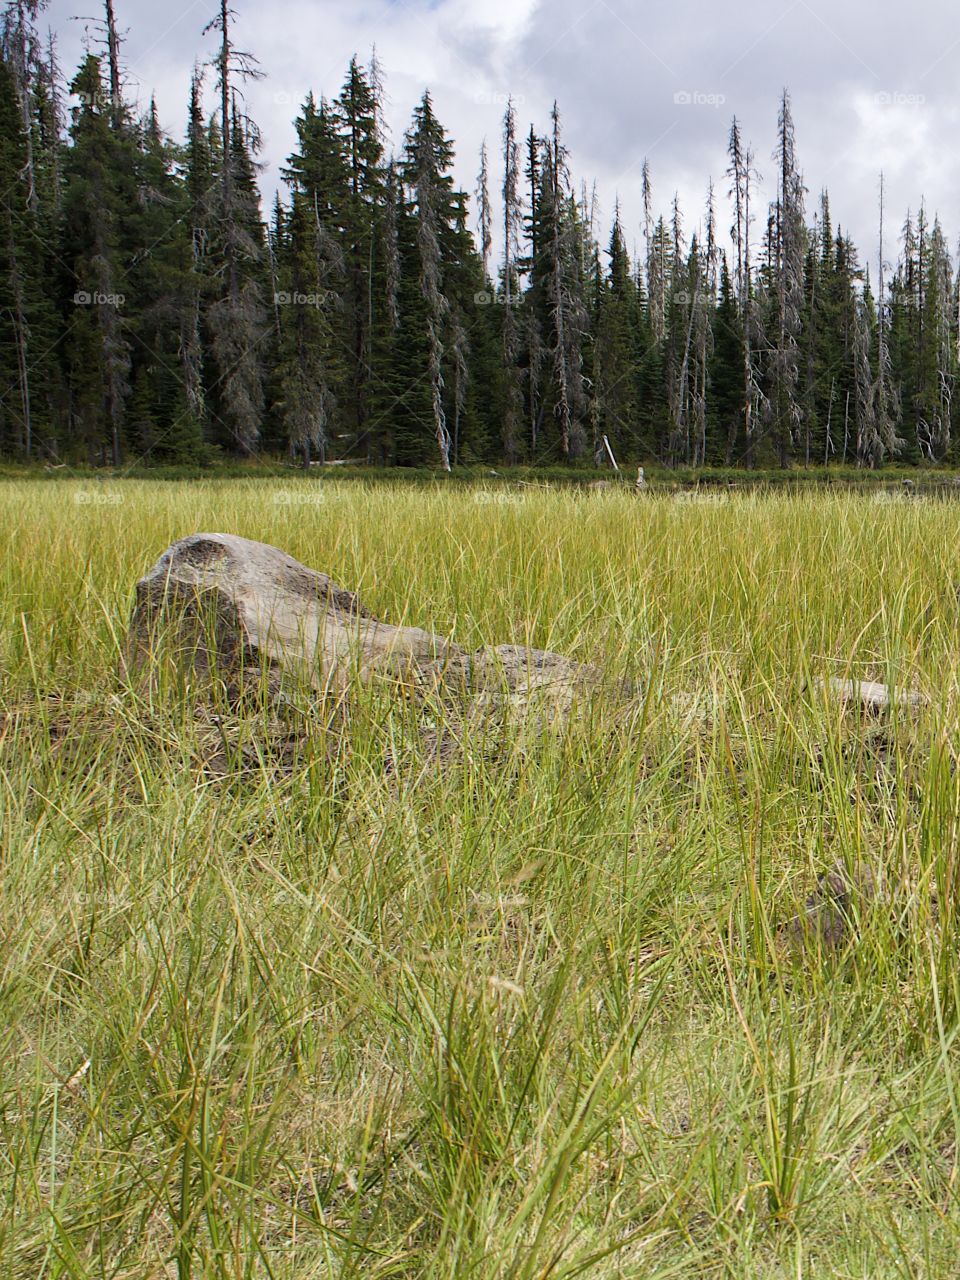 The grassy shoreline of Scott Lake in the mountain forests of Oregon on a summer day.